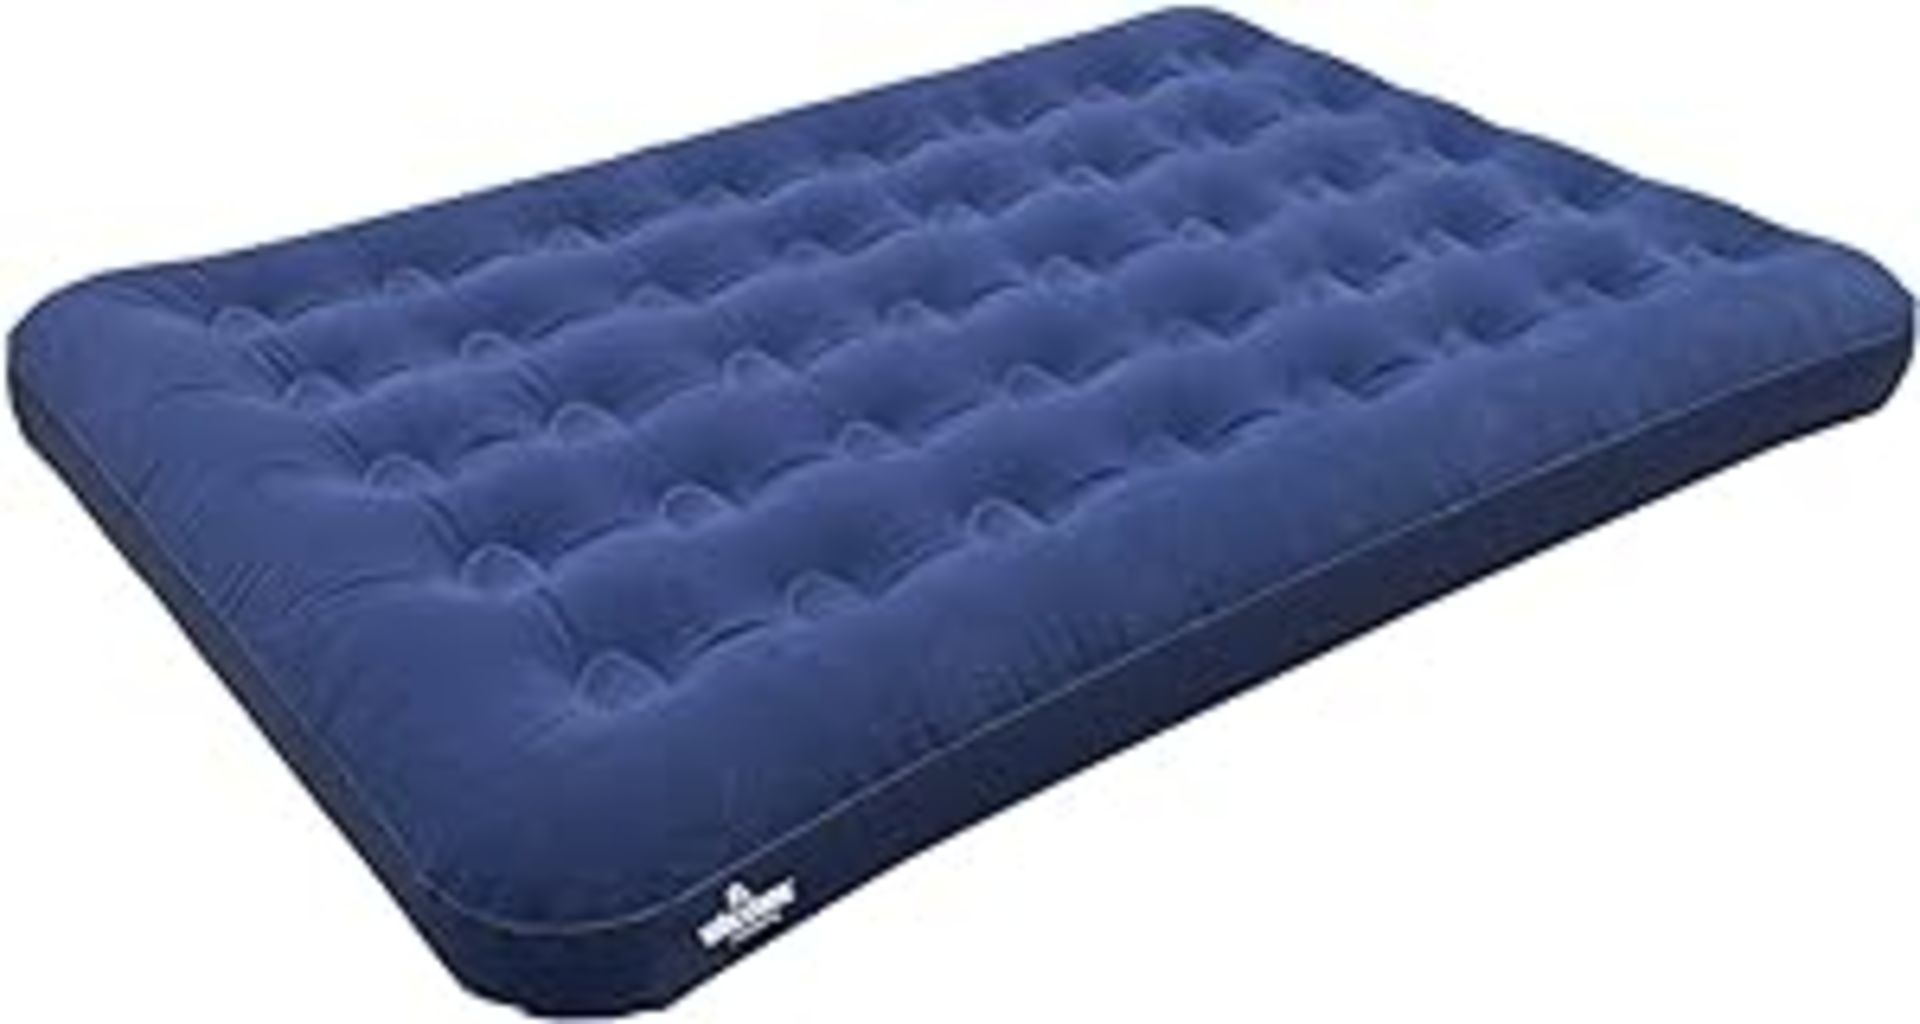 Milestone Camping 88010 Flocked Double Airbed/Easy Inflate & Deflate/Weatherproof/Great For Camping,